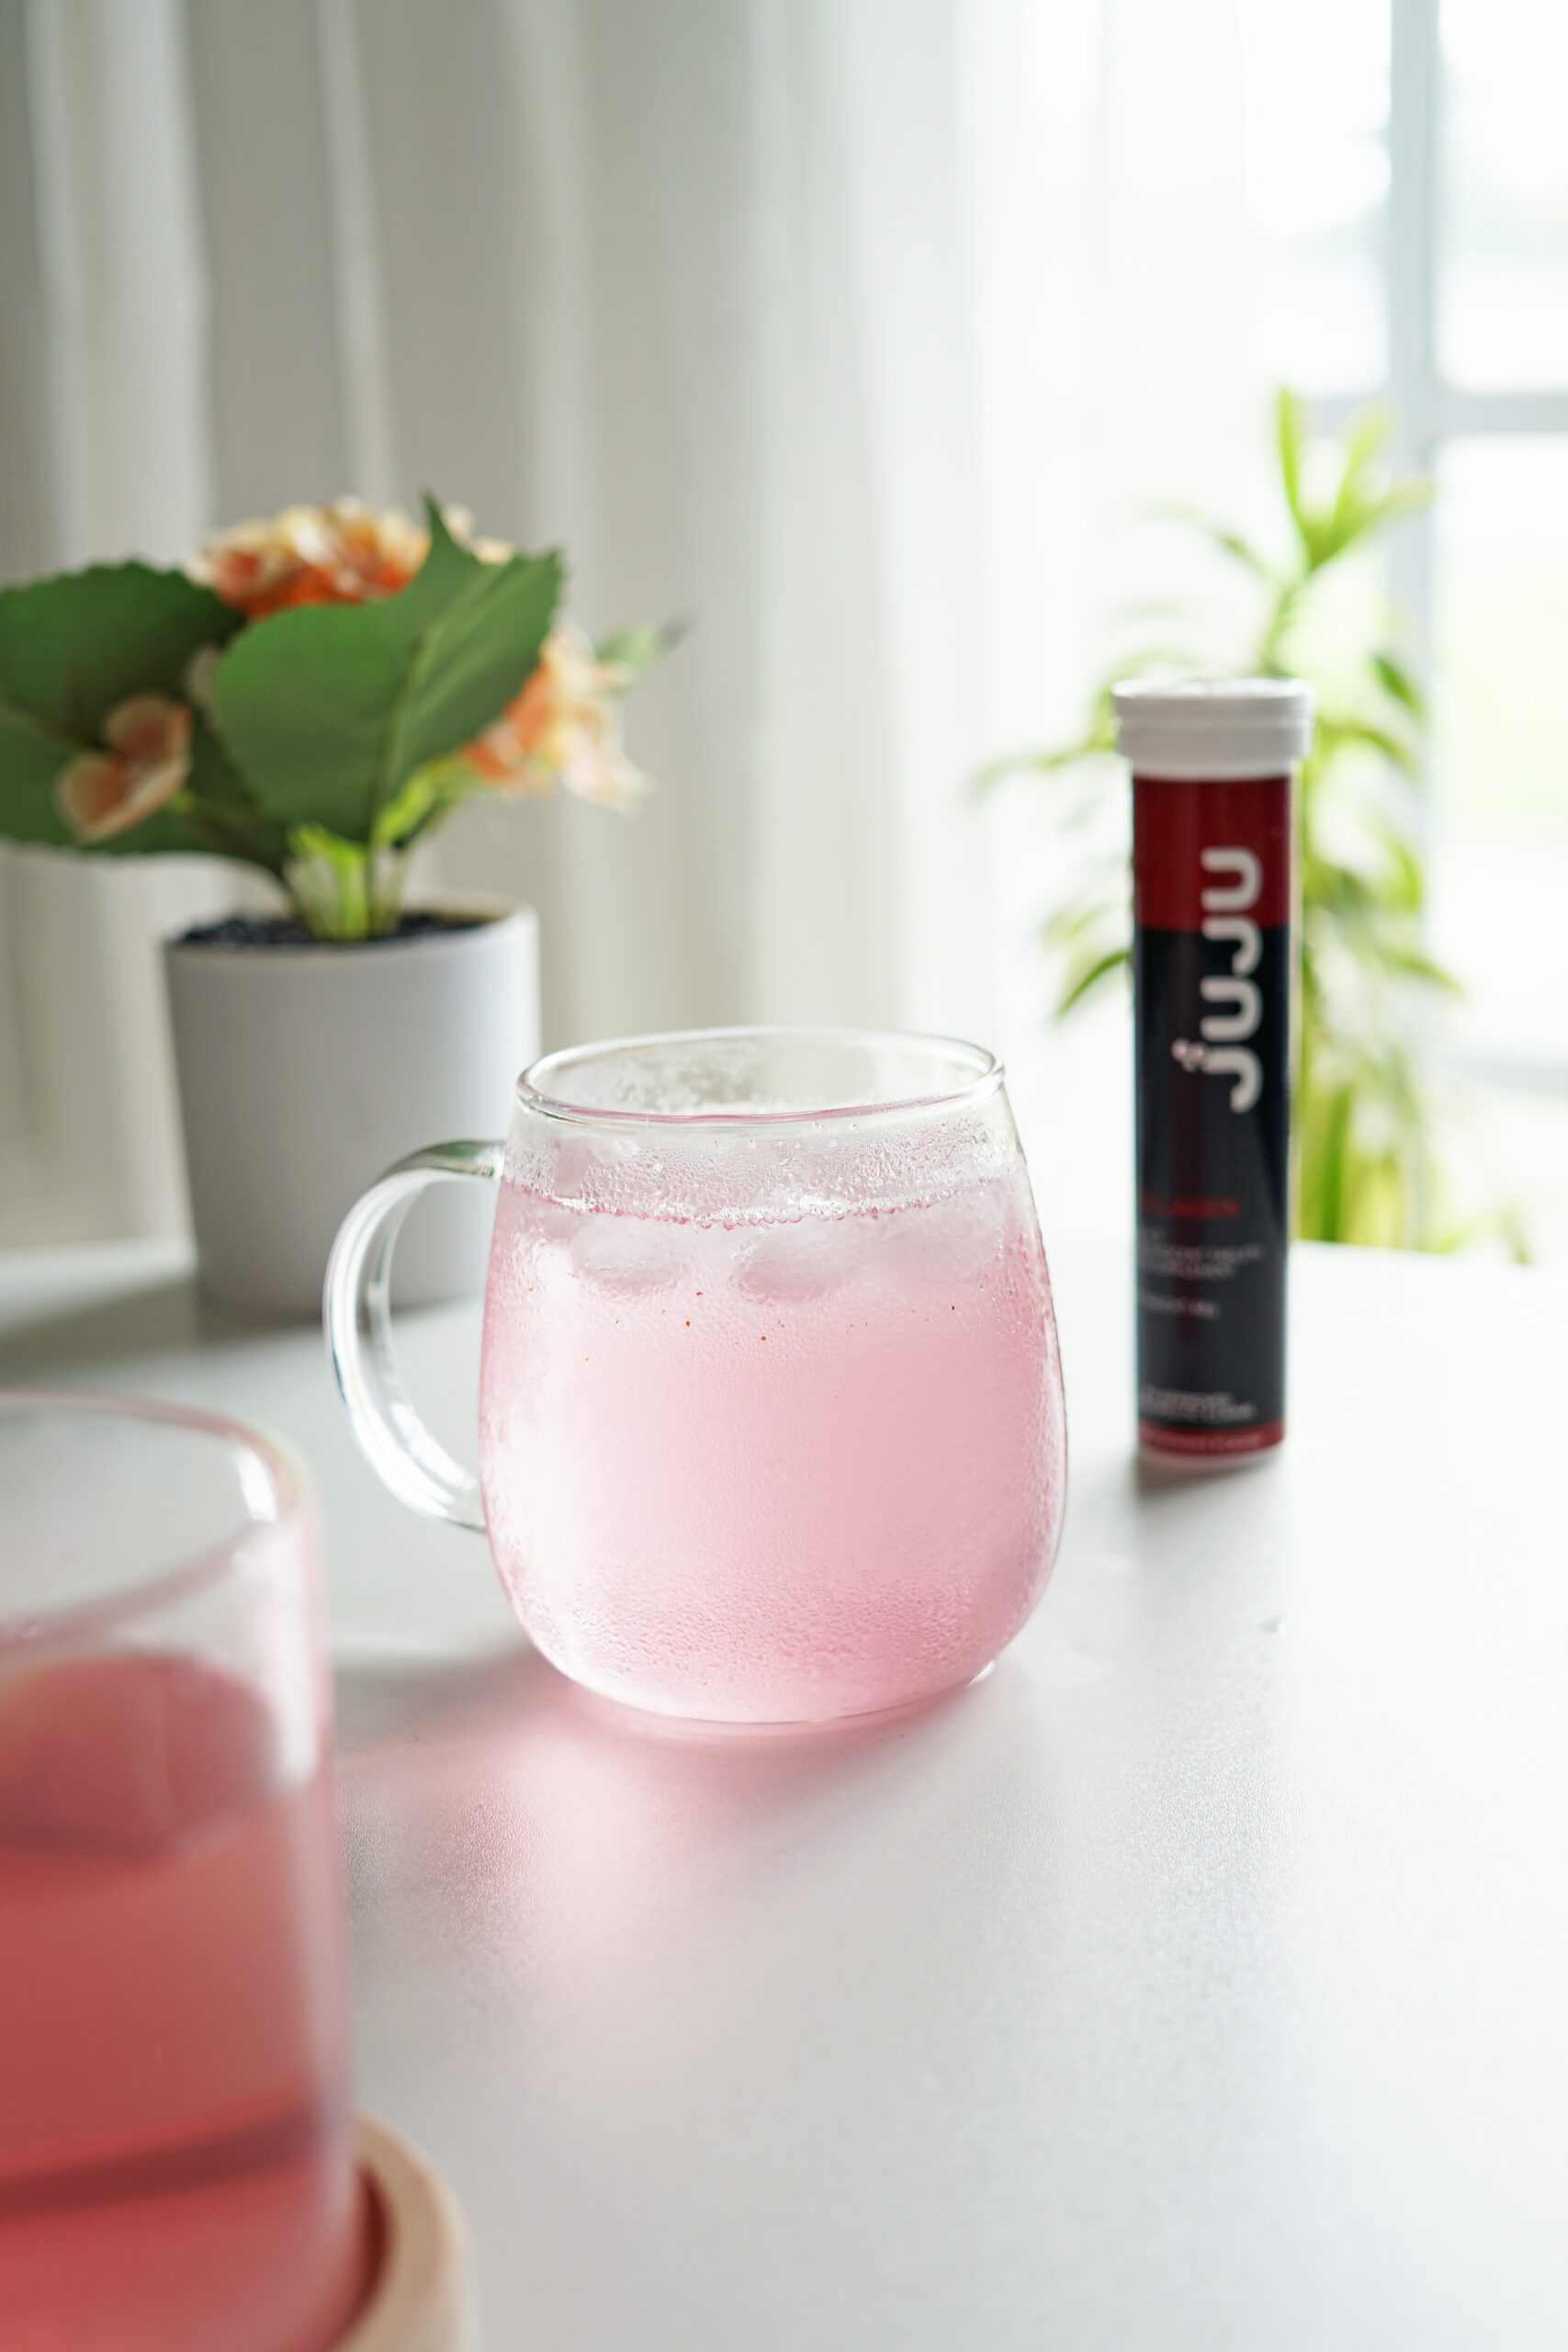 A glass with dissolve juju collagen with juju collagen tube container beside it.